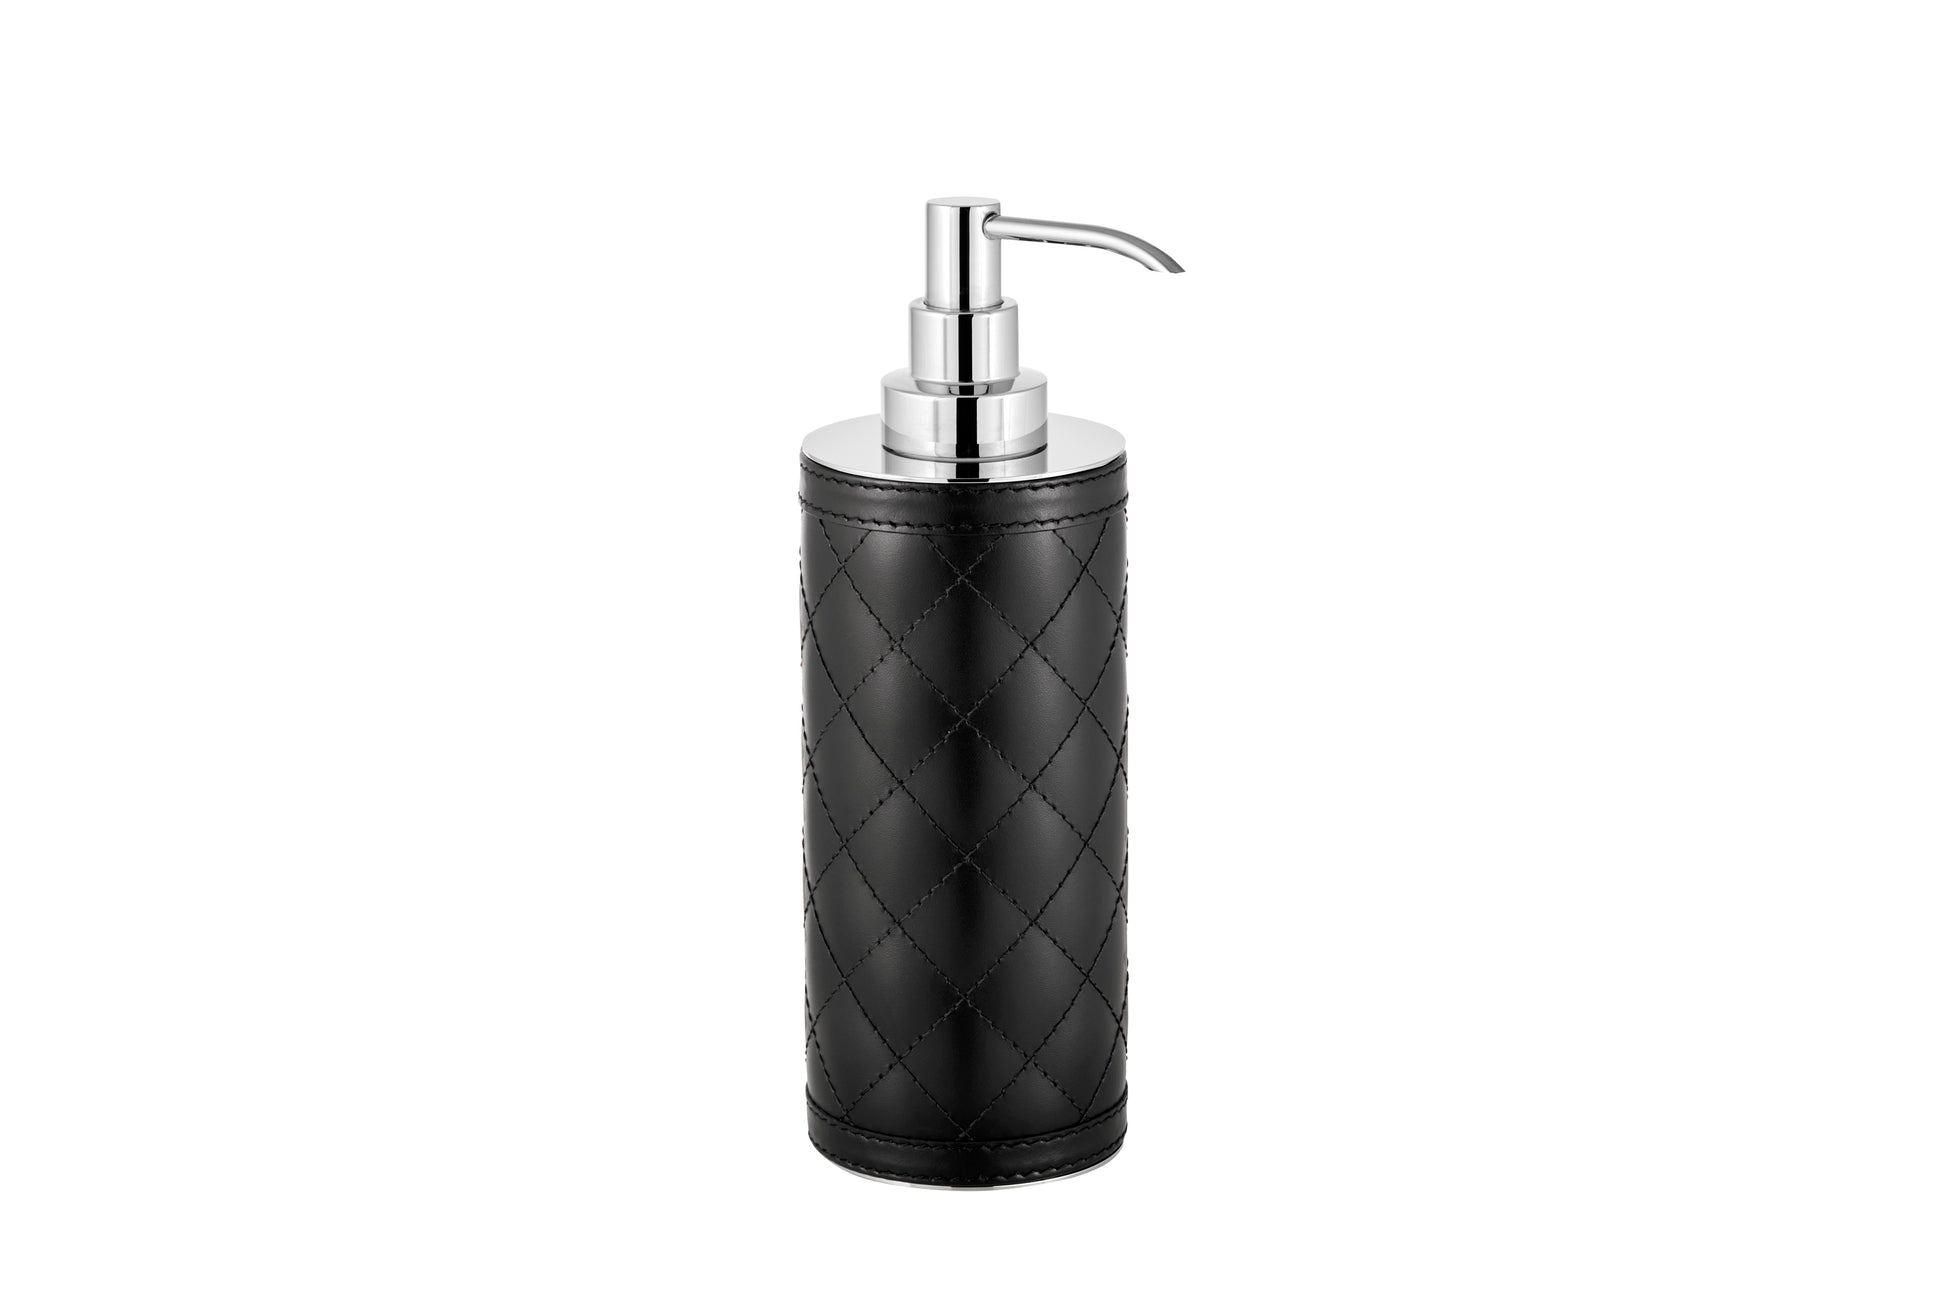 Riviere Alghero Diamonds Leather Tall Soap Dispenser | Covered with Quilted Diamonds Padded Leather | Features Chrome or Gold Metal Finish | Elevates Bathroom Decor with Luxurious Style